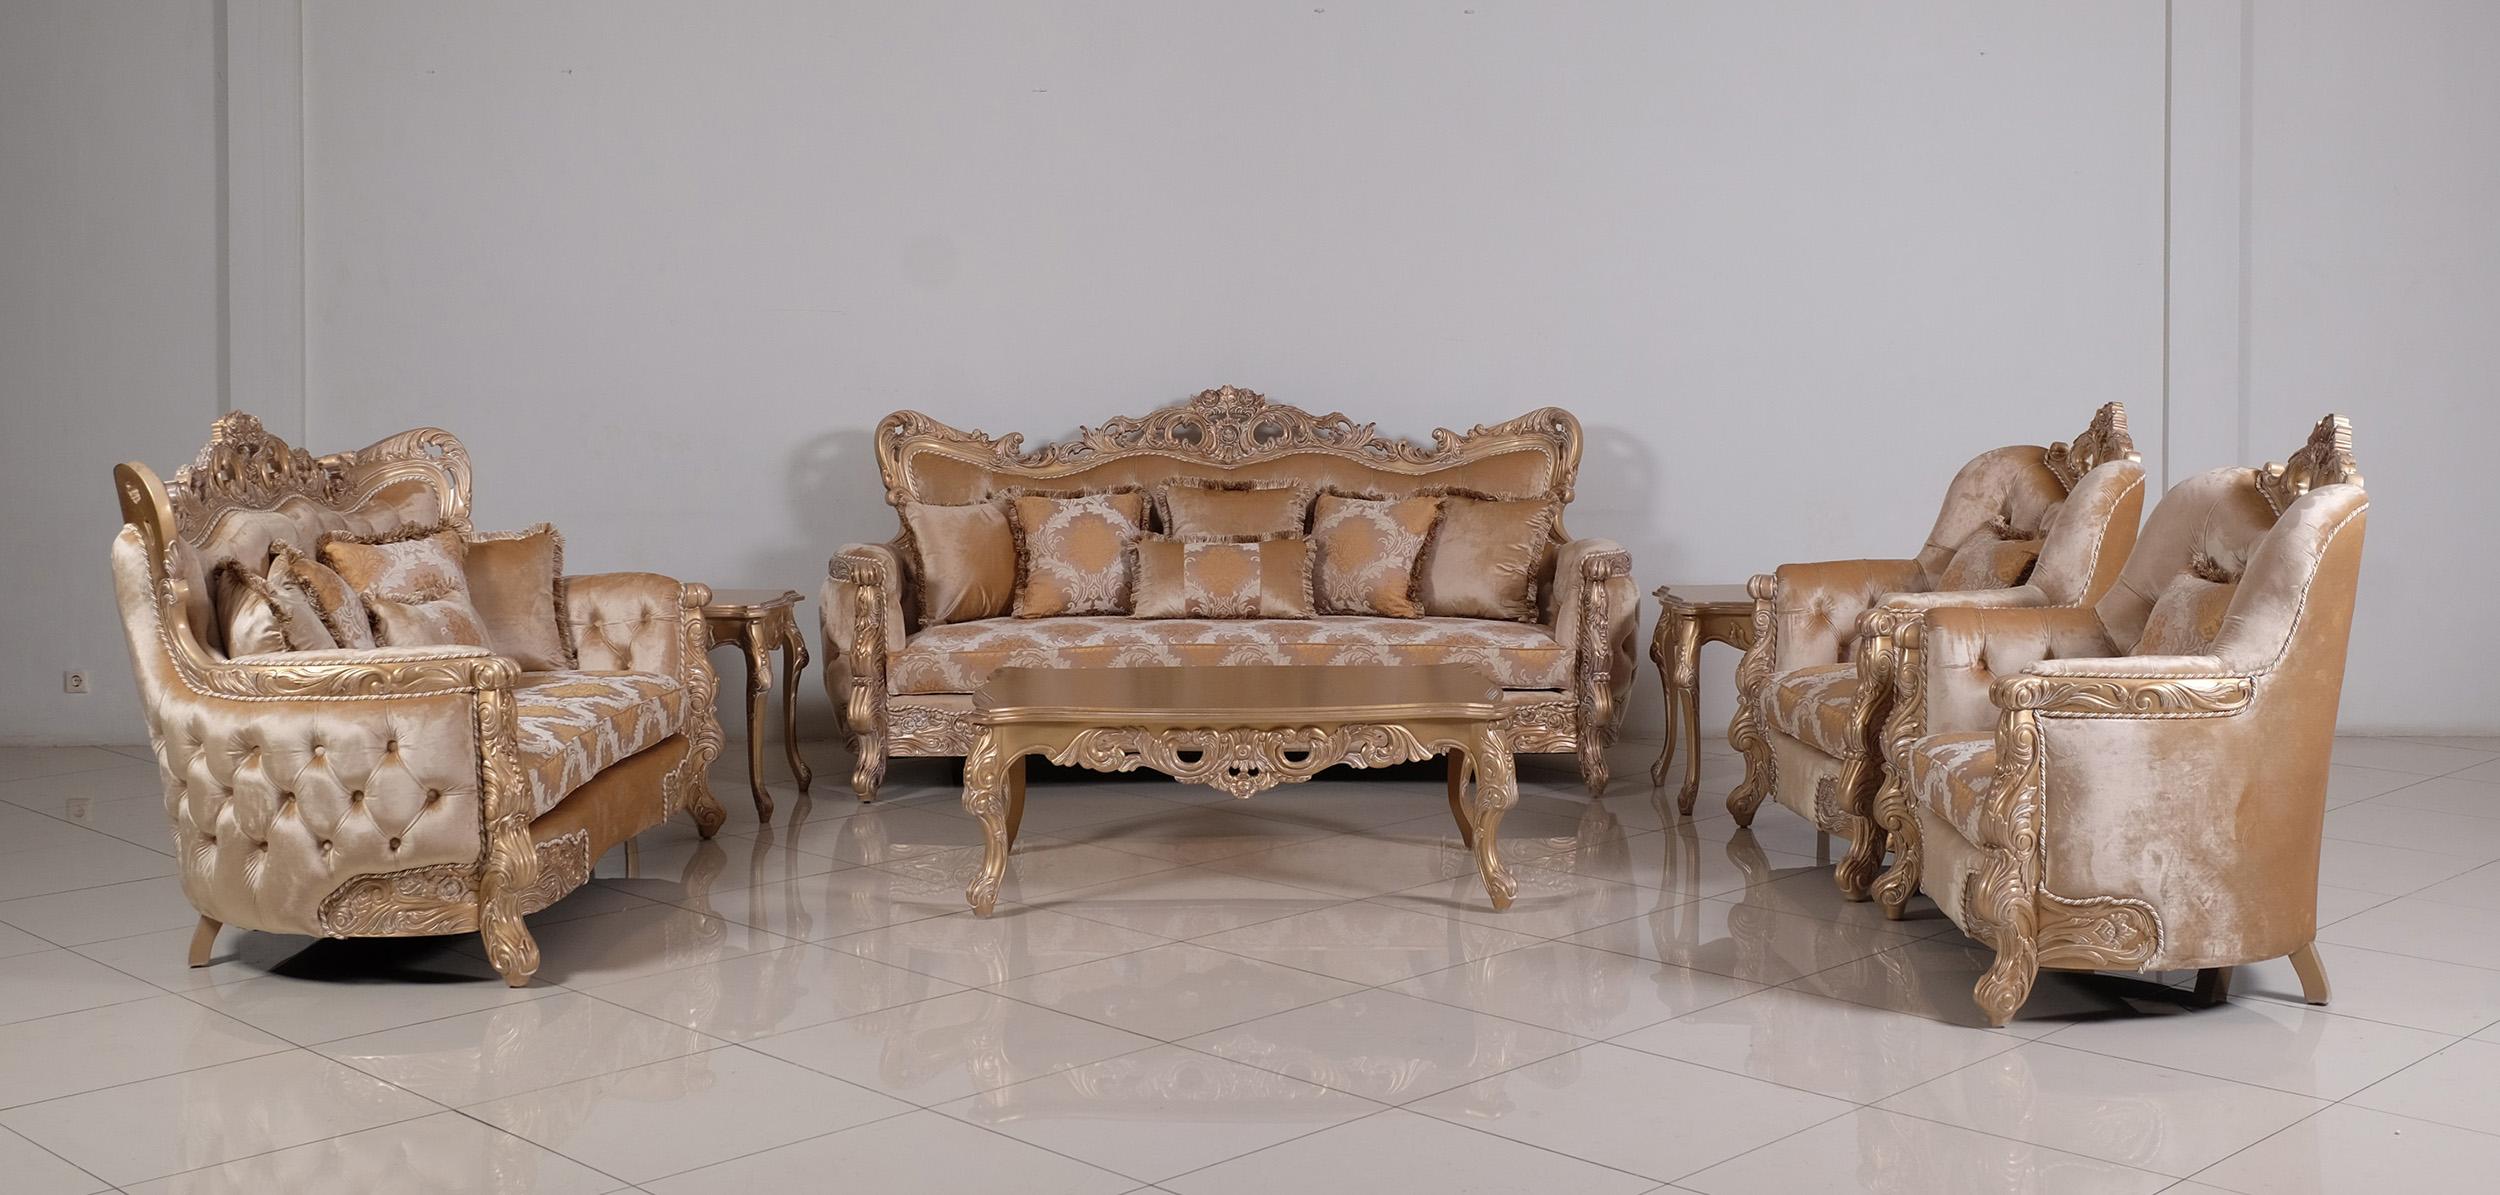 

    
32006-S Luxury Champagne & Cooper IMPERIAL PALACE Sofa EUROPEAN FURNITURE Traditional
